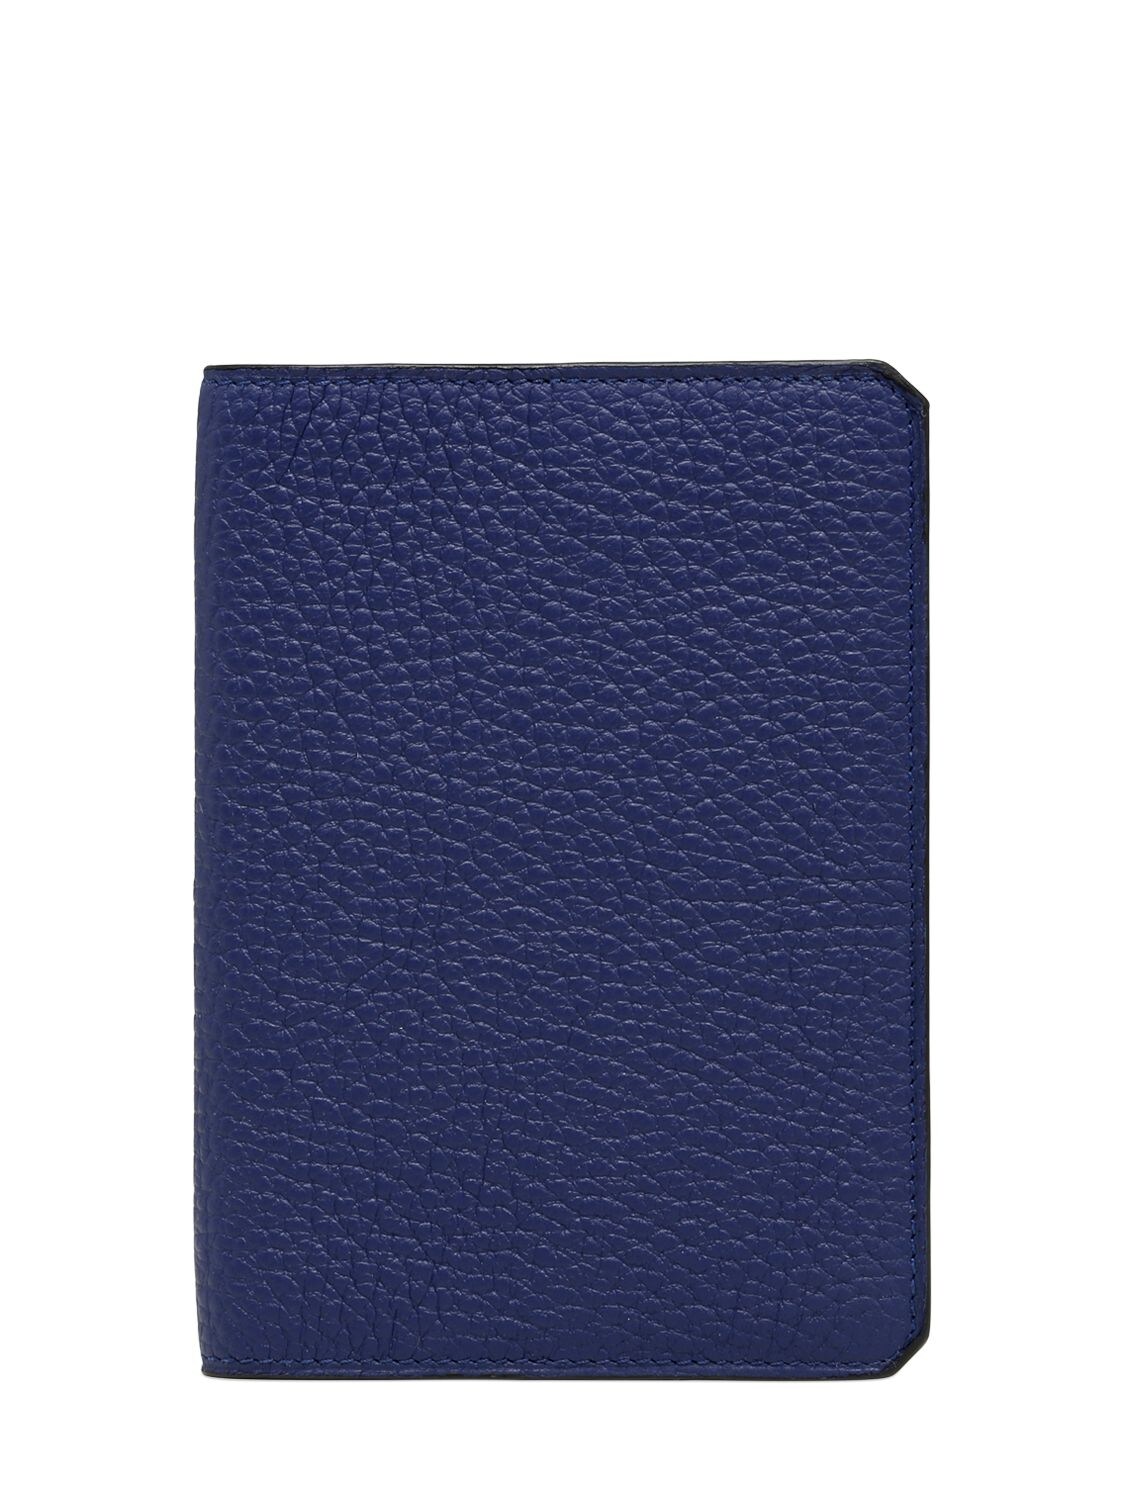 Aizea Soft Leather Passport Holder In Blue